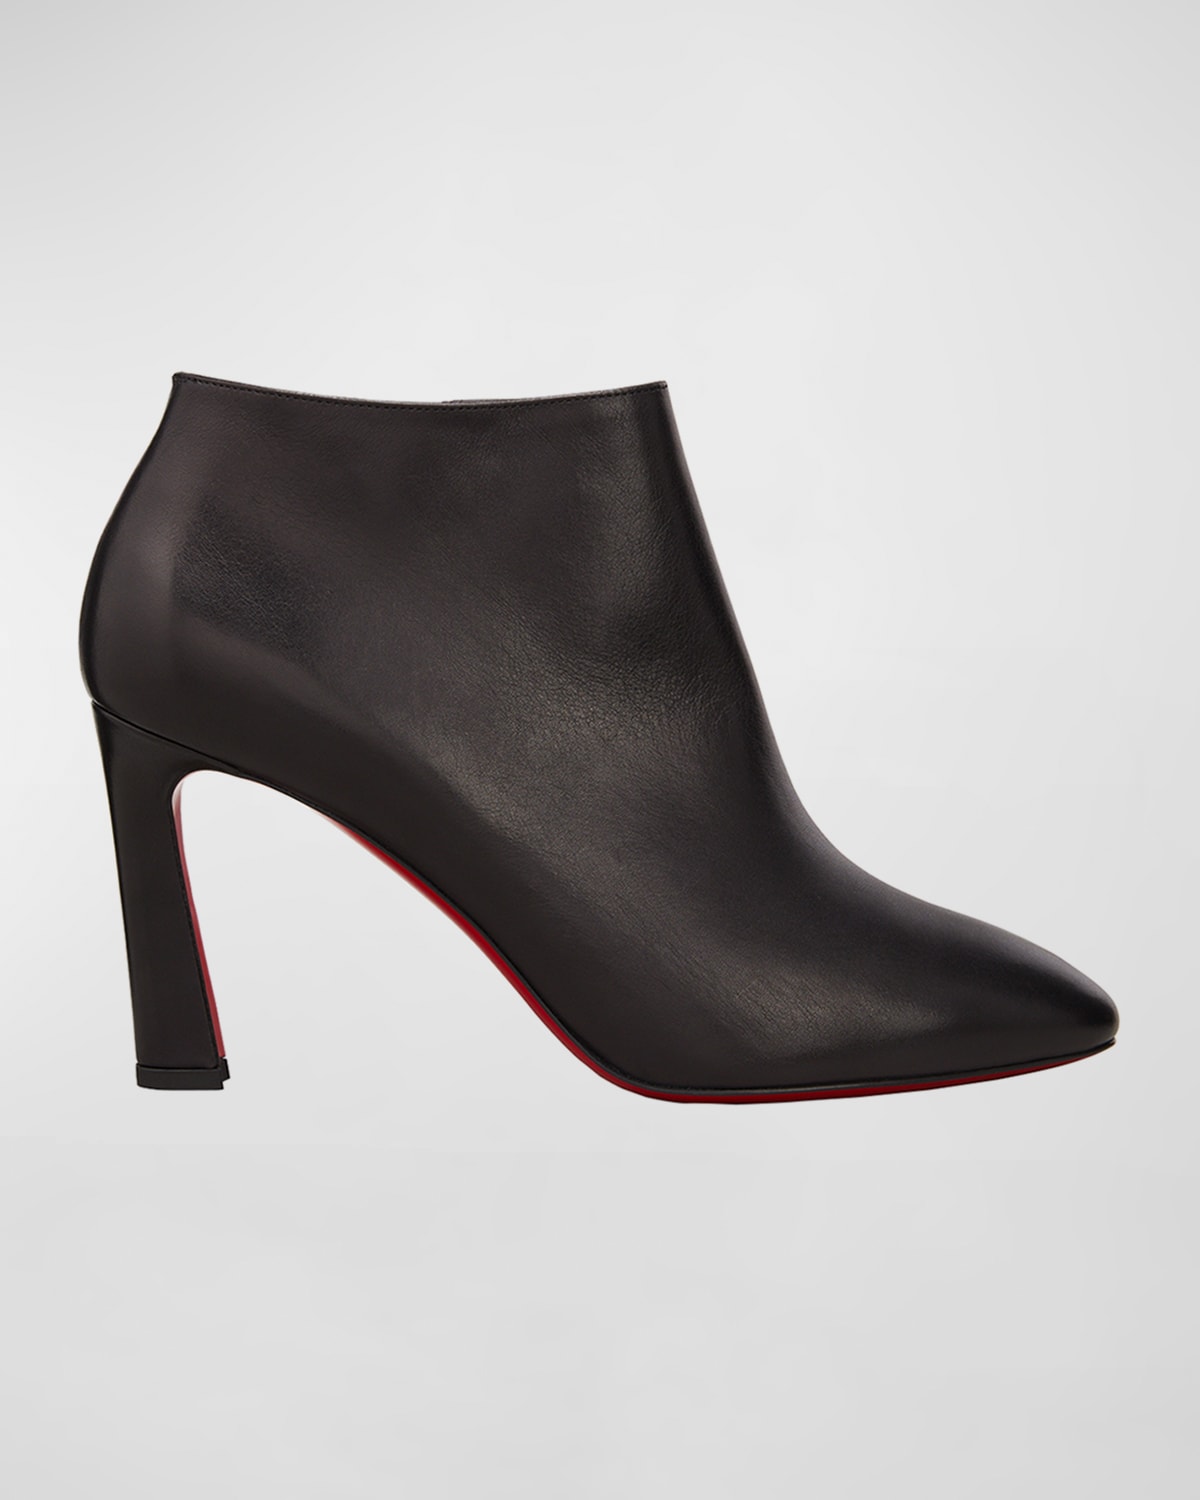 Eleonor Red Sole Ankle Booties